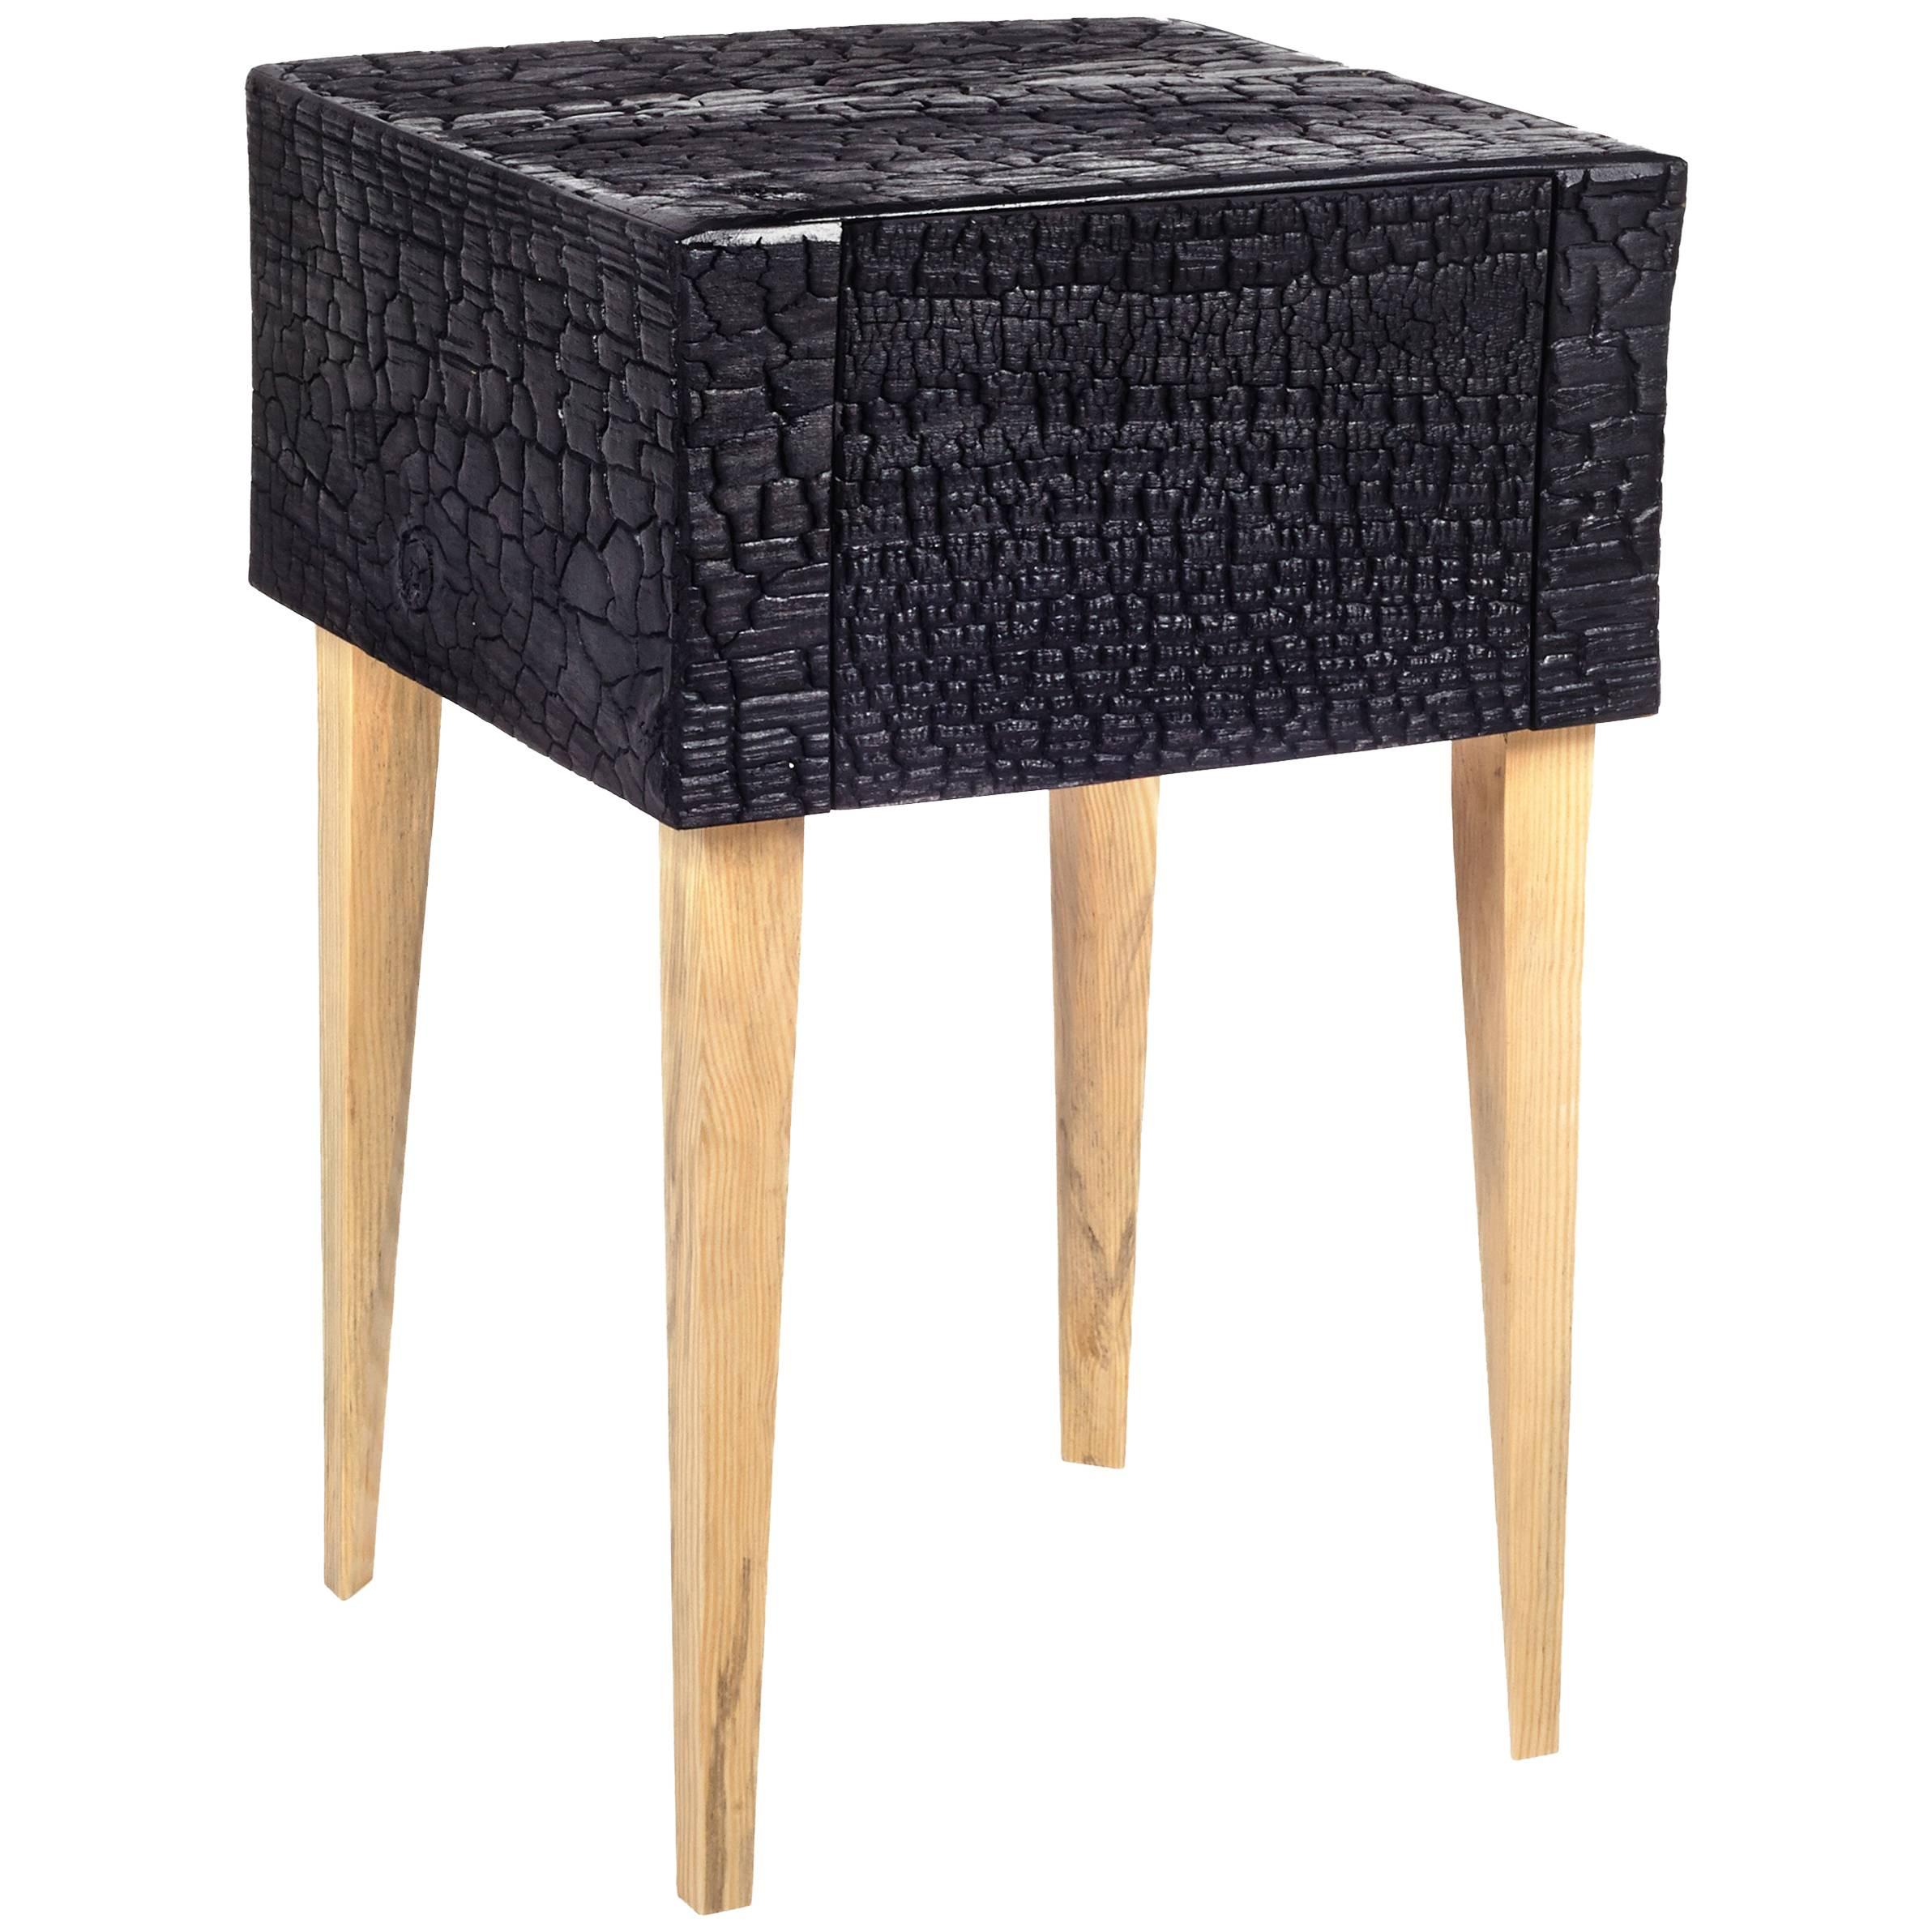 Charred End Table in Loblolly Pine with Single Drawer and Triangular Legs